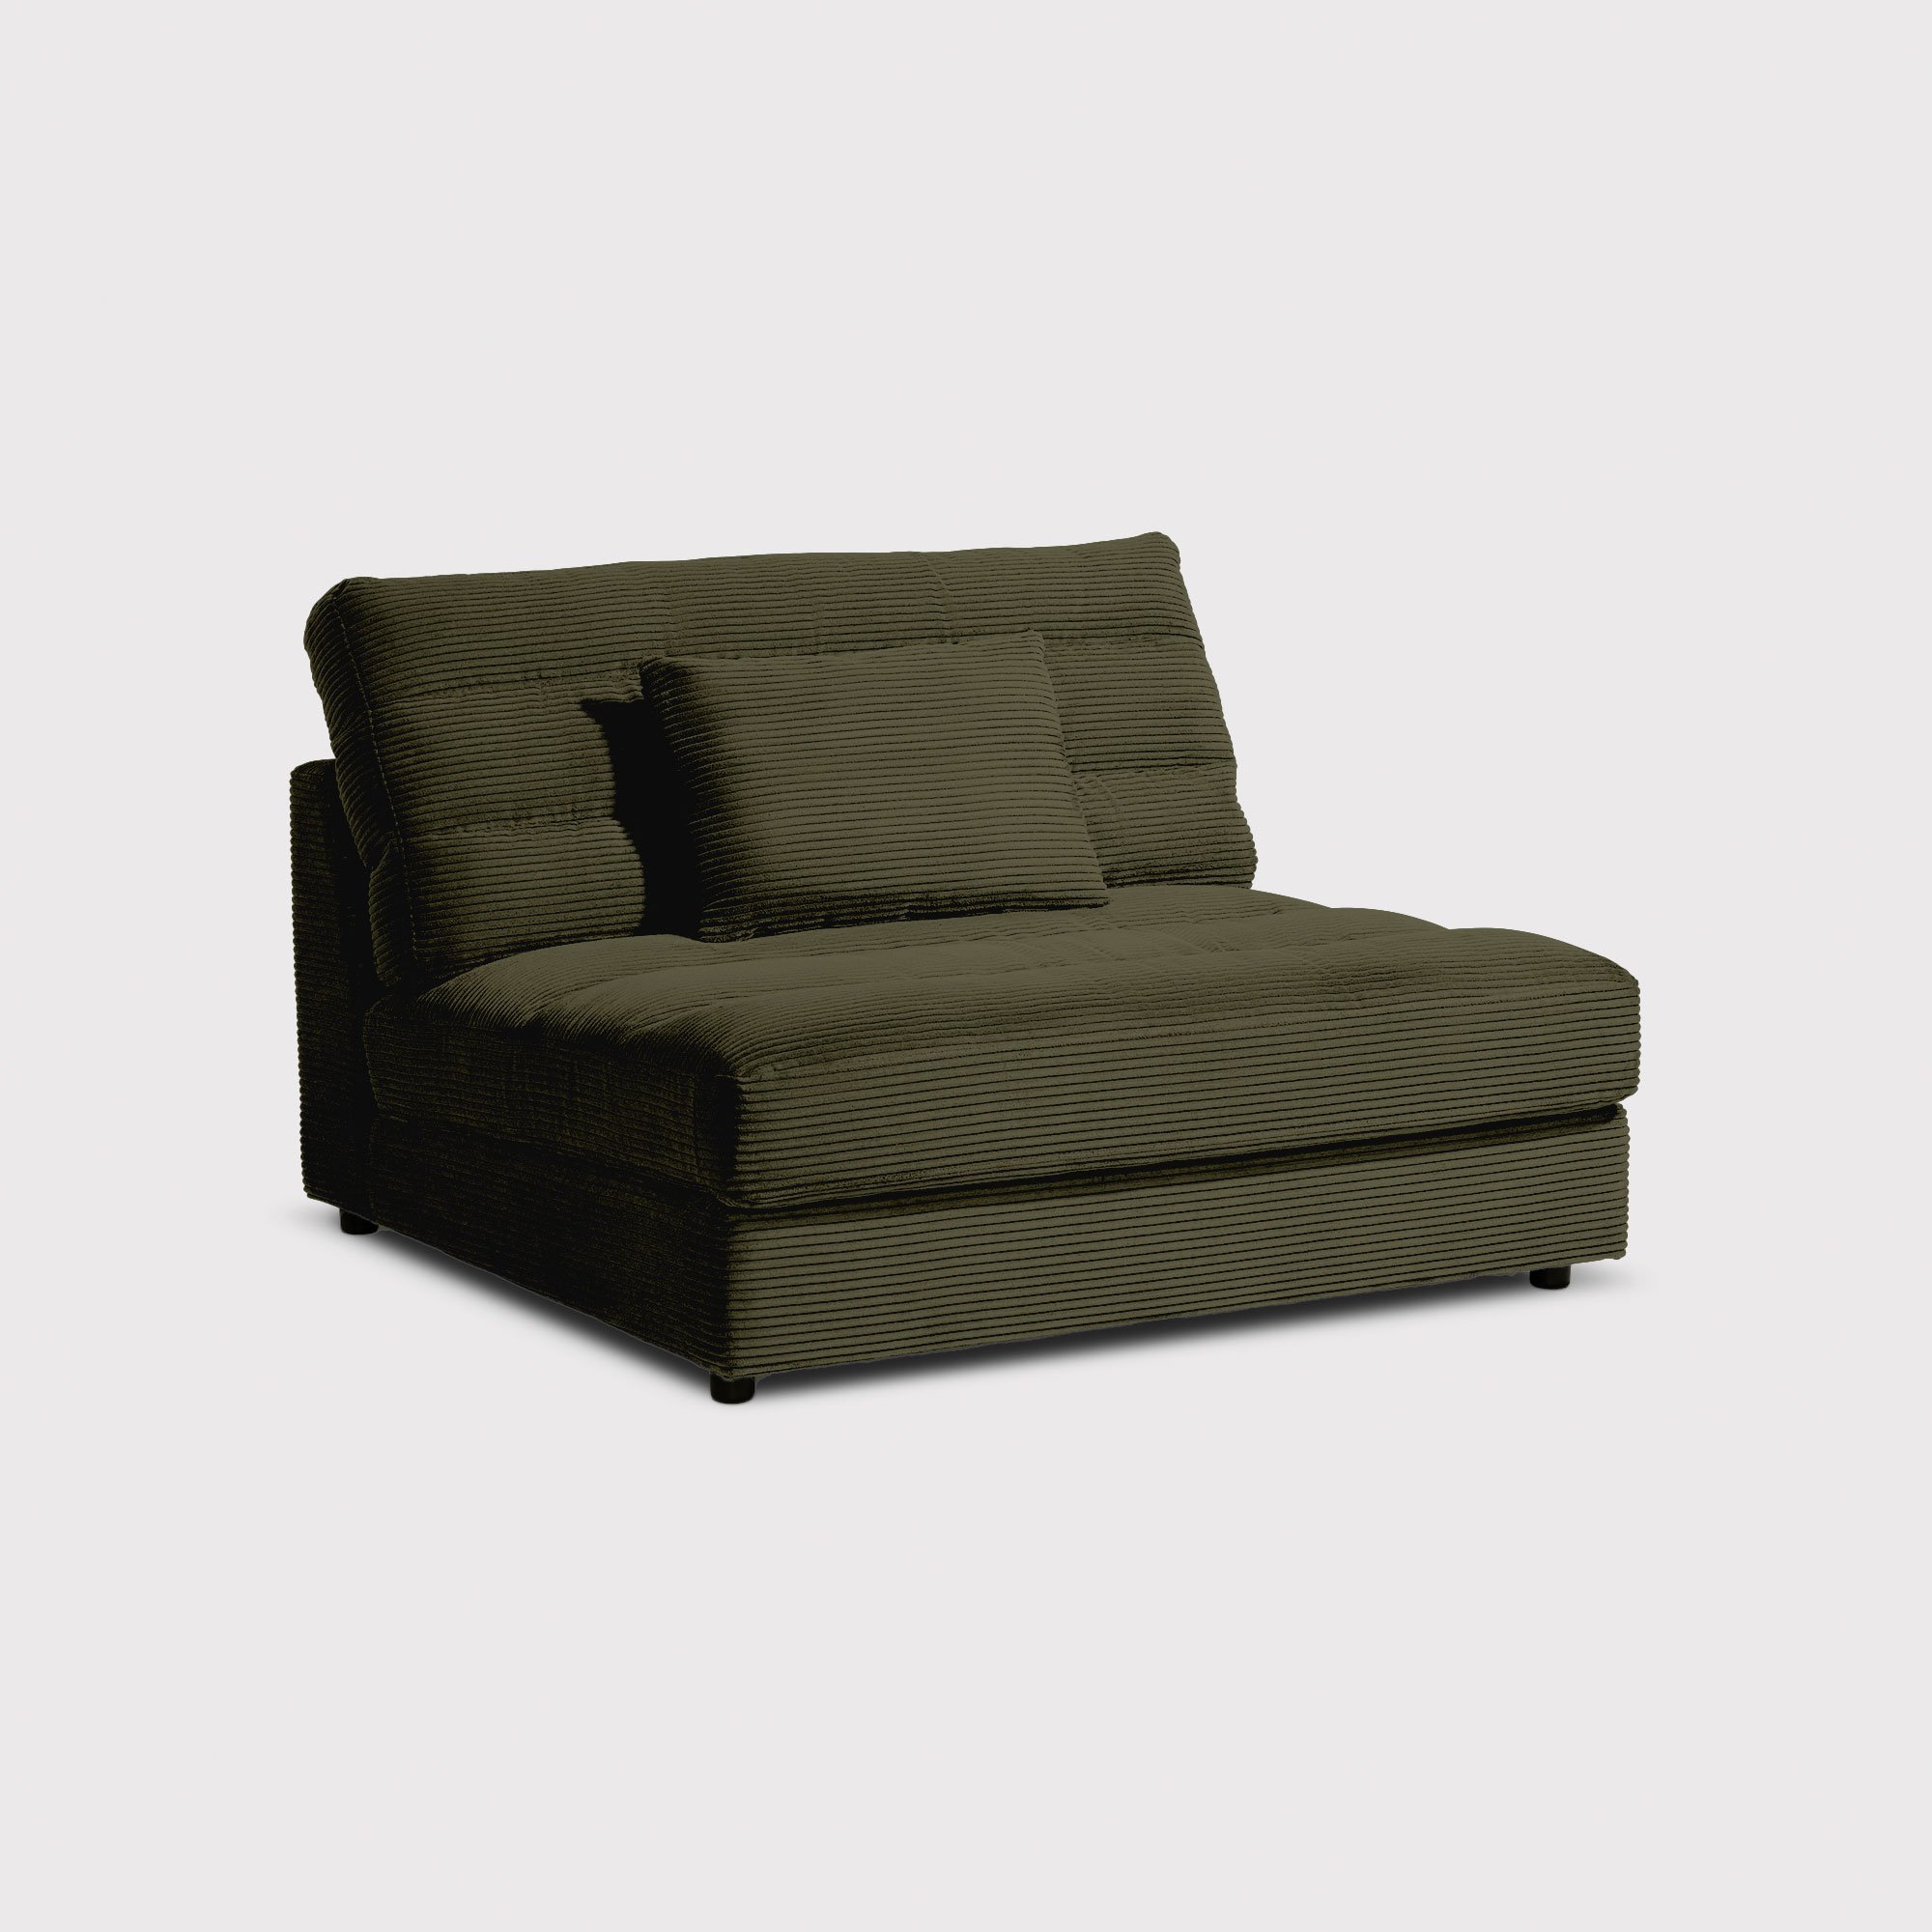 Twain 1.5 Seater Without Armrests, Green Fabric | Barker & Stonehouse